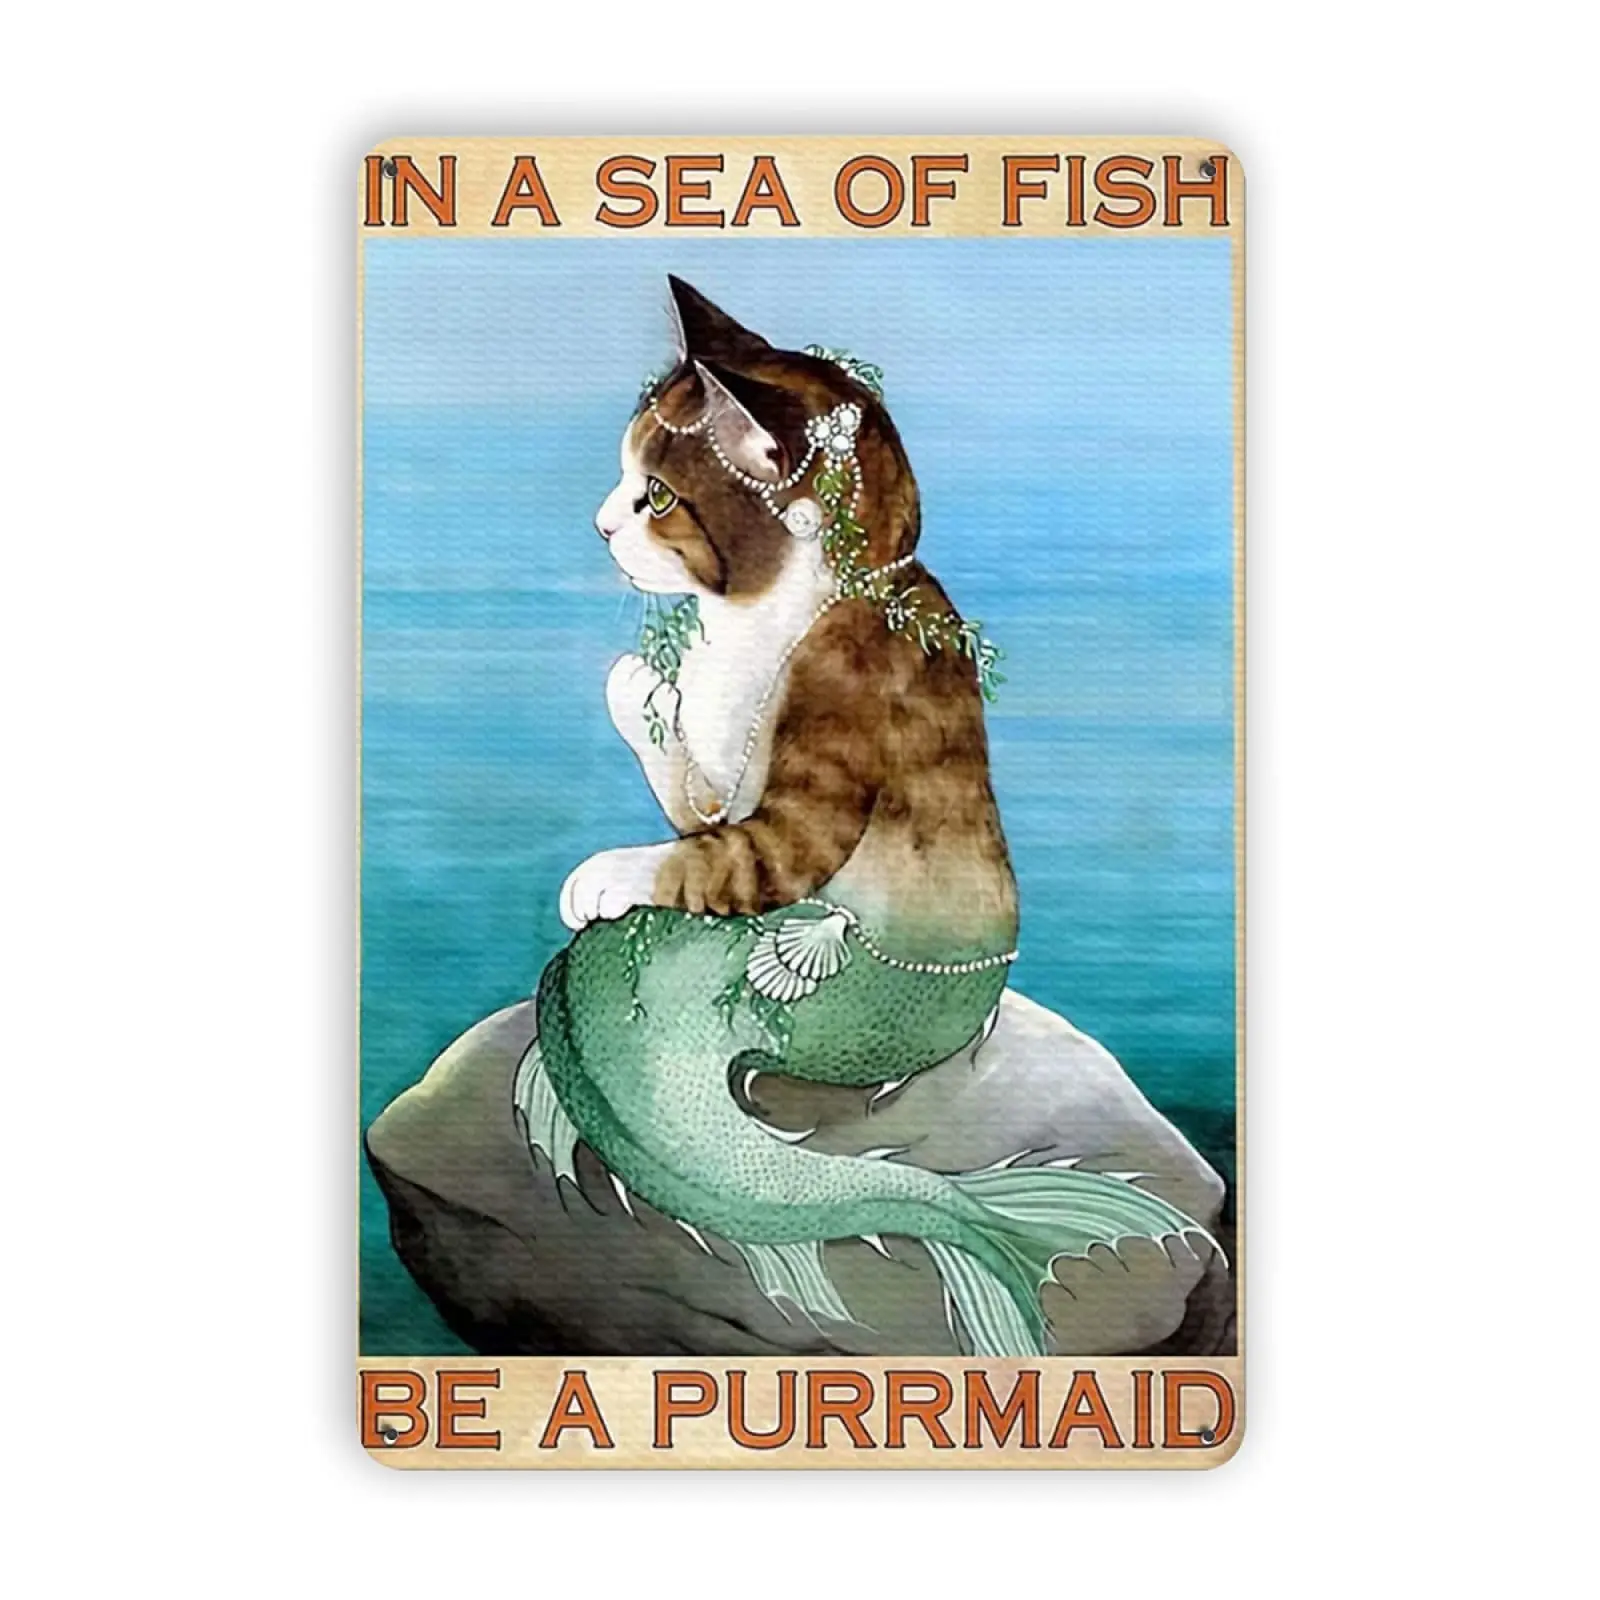 

in A Sea of Fish Be A Purrmaid - Retro Metal Signs Fashion Garage Tin Sign Wall Plaque Poster for Home Decor for Bars, Cafes 12x